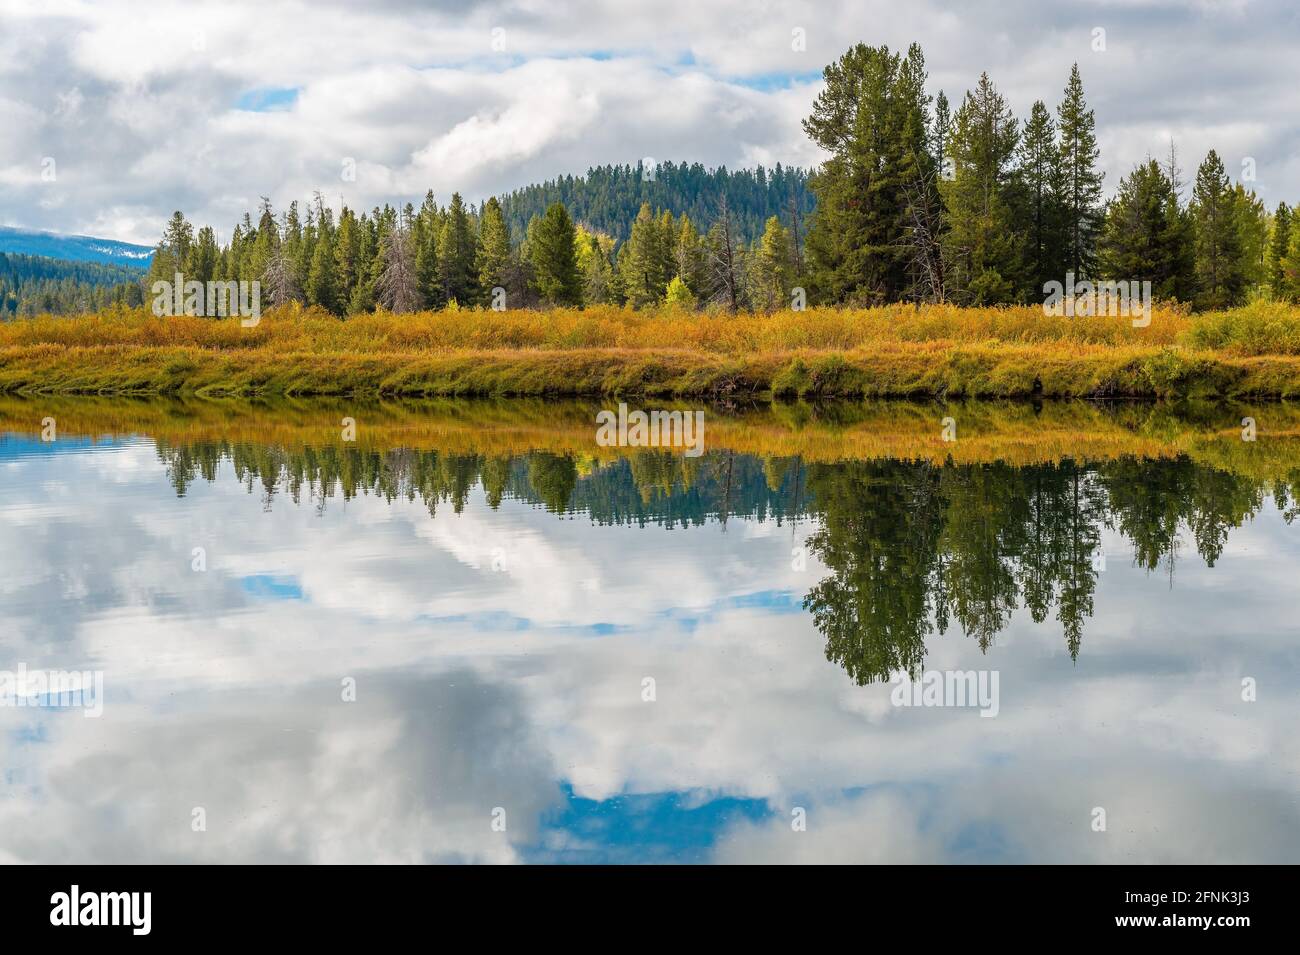 Snake River Reflection by Oxbow Bend in autunno, Grand Teton National Park, Wyoming, Stati Uniti d'America, USA. Foto Stock